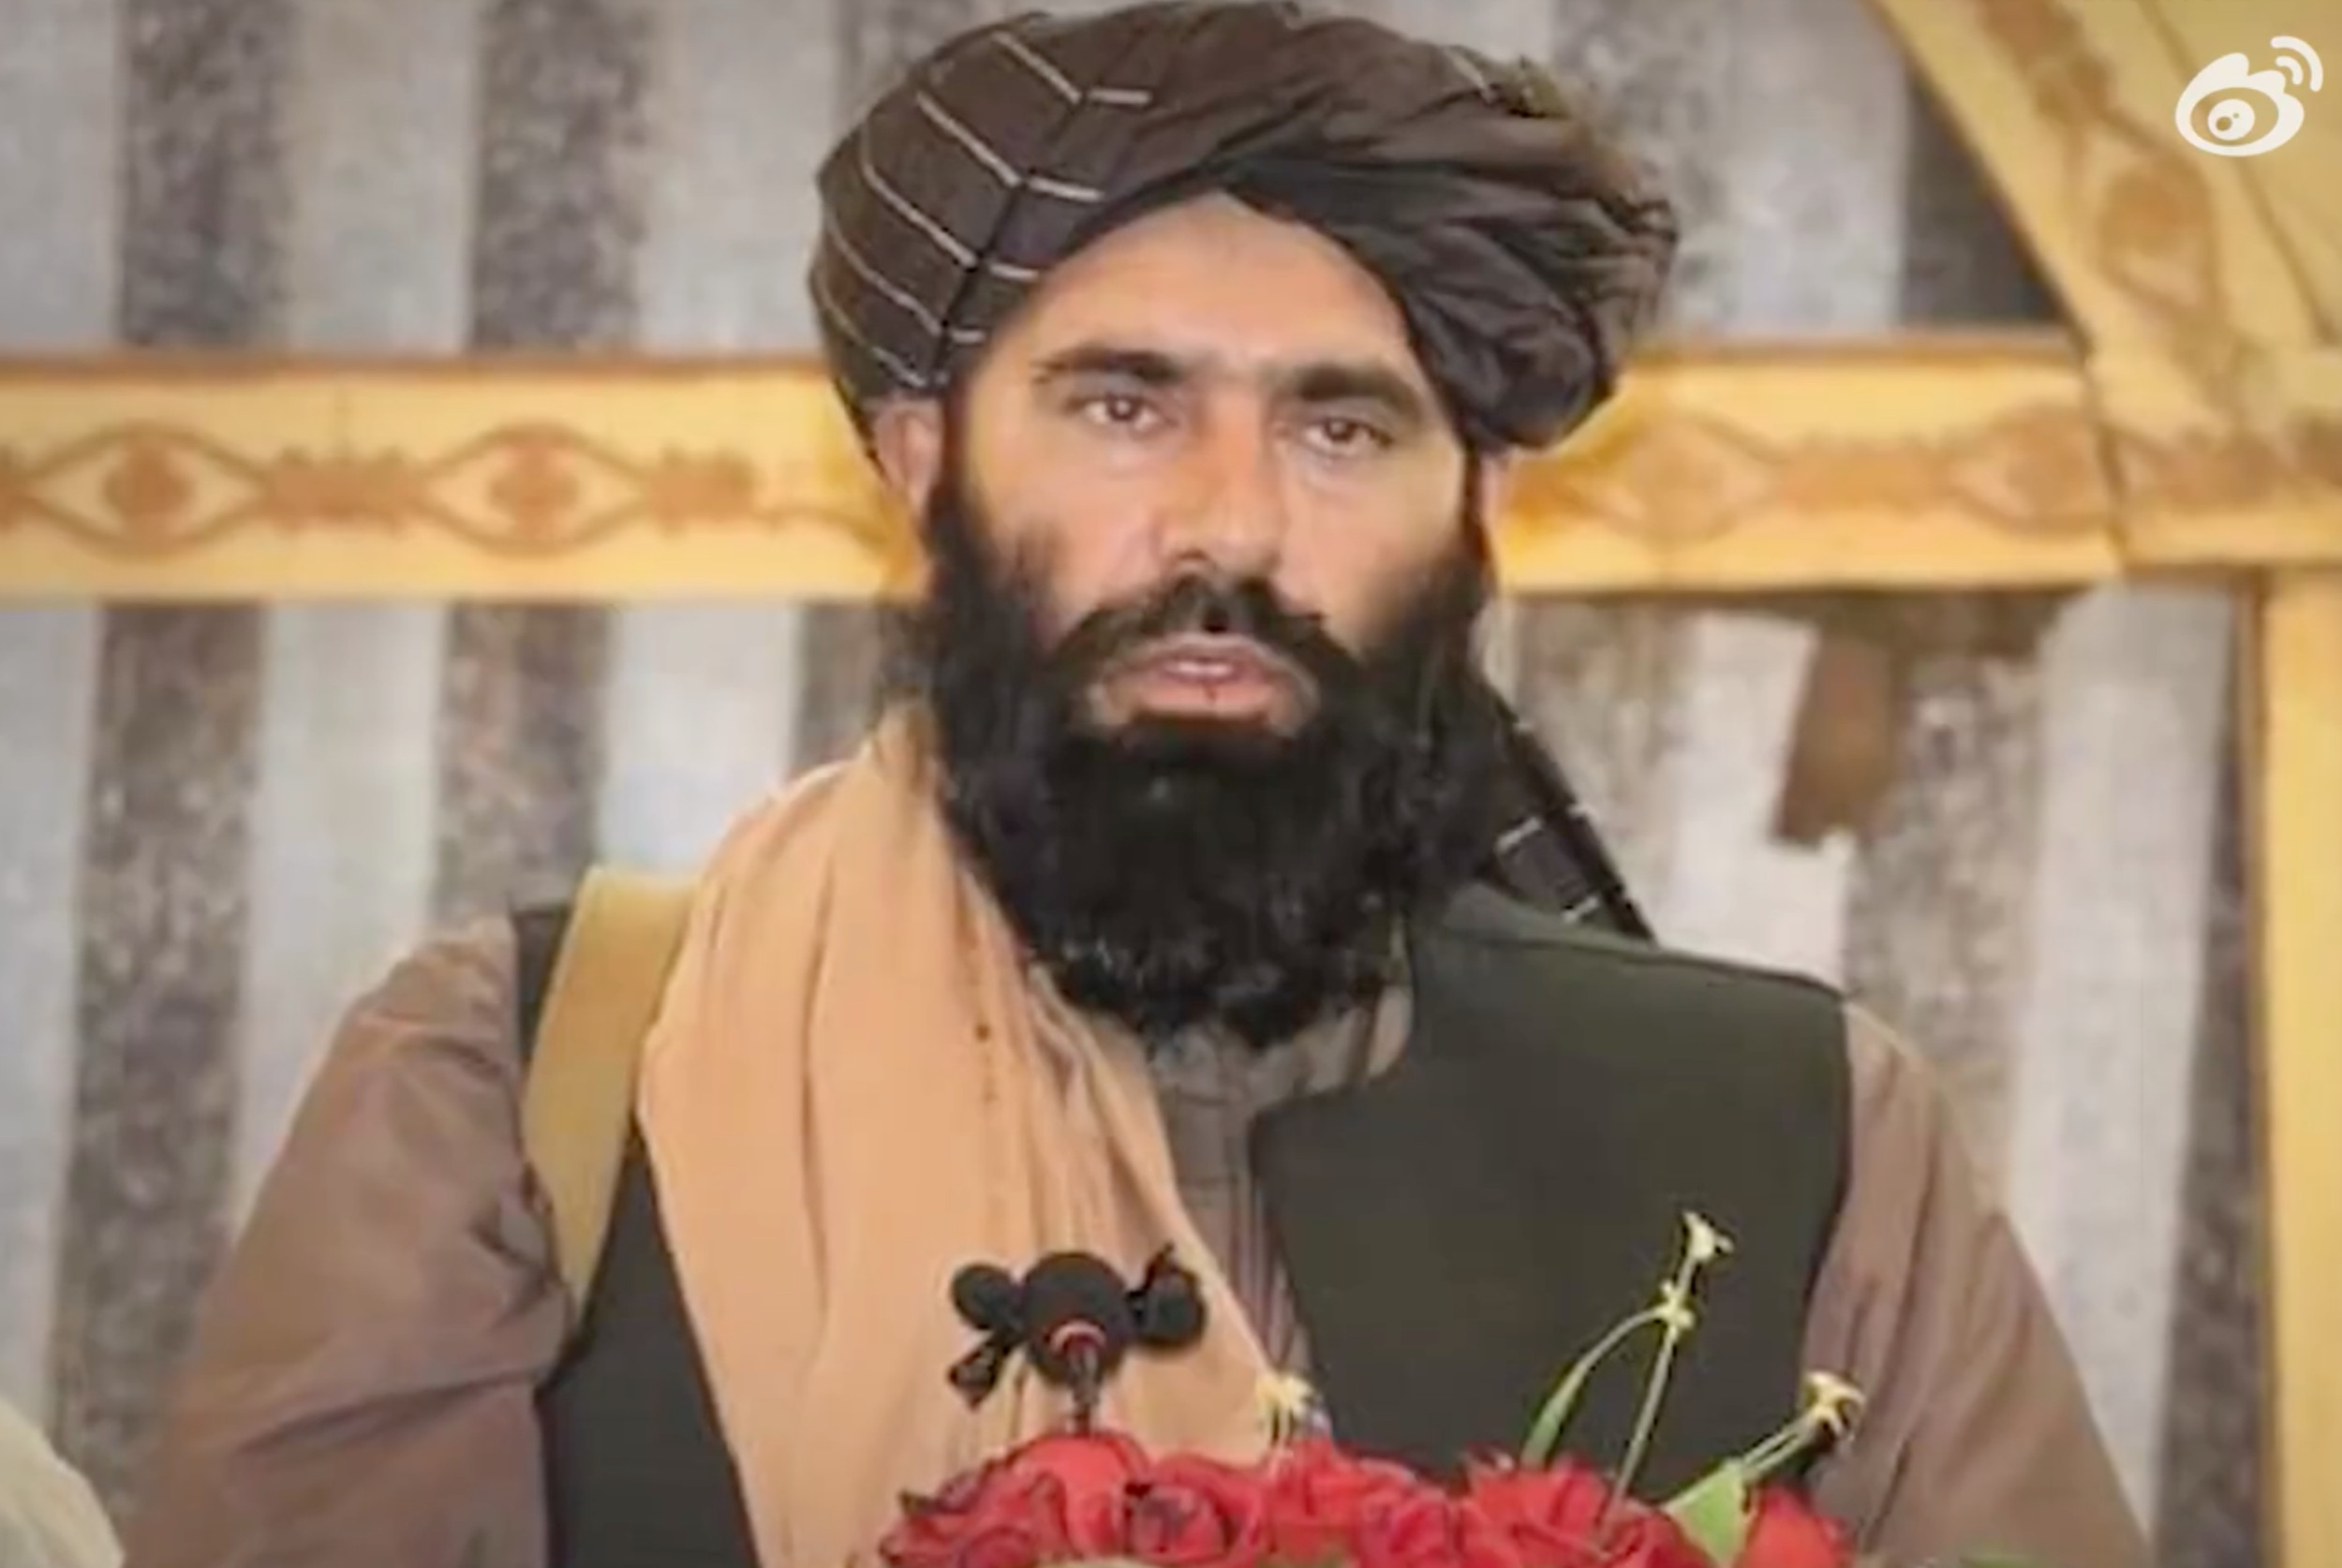 The Taliban governor of Afghanistan’s Balkh province, known for fighting against Islamic State jihadists, was killed in a suicide attack at his office on Thursday, officials said. Photo: Weibo